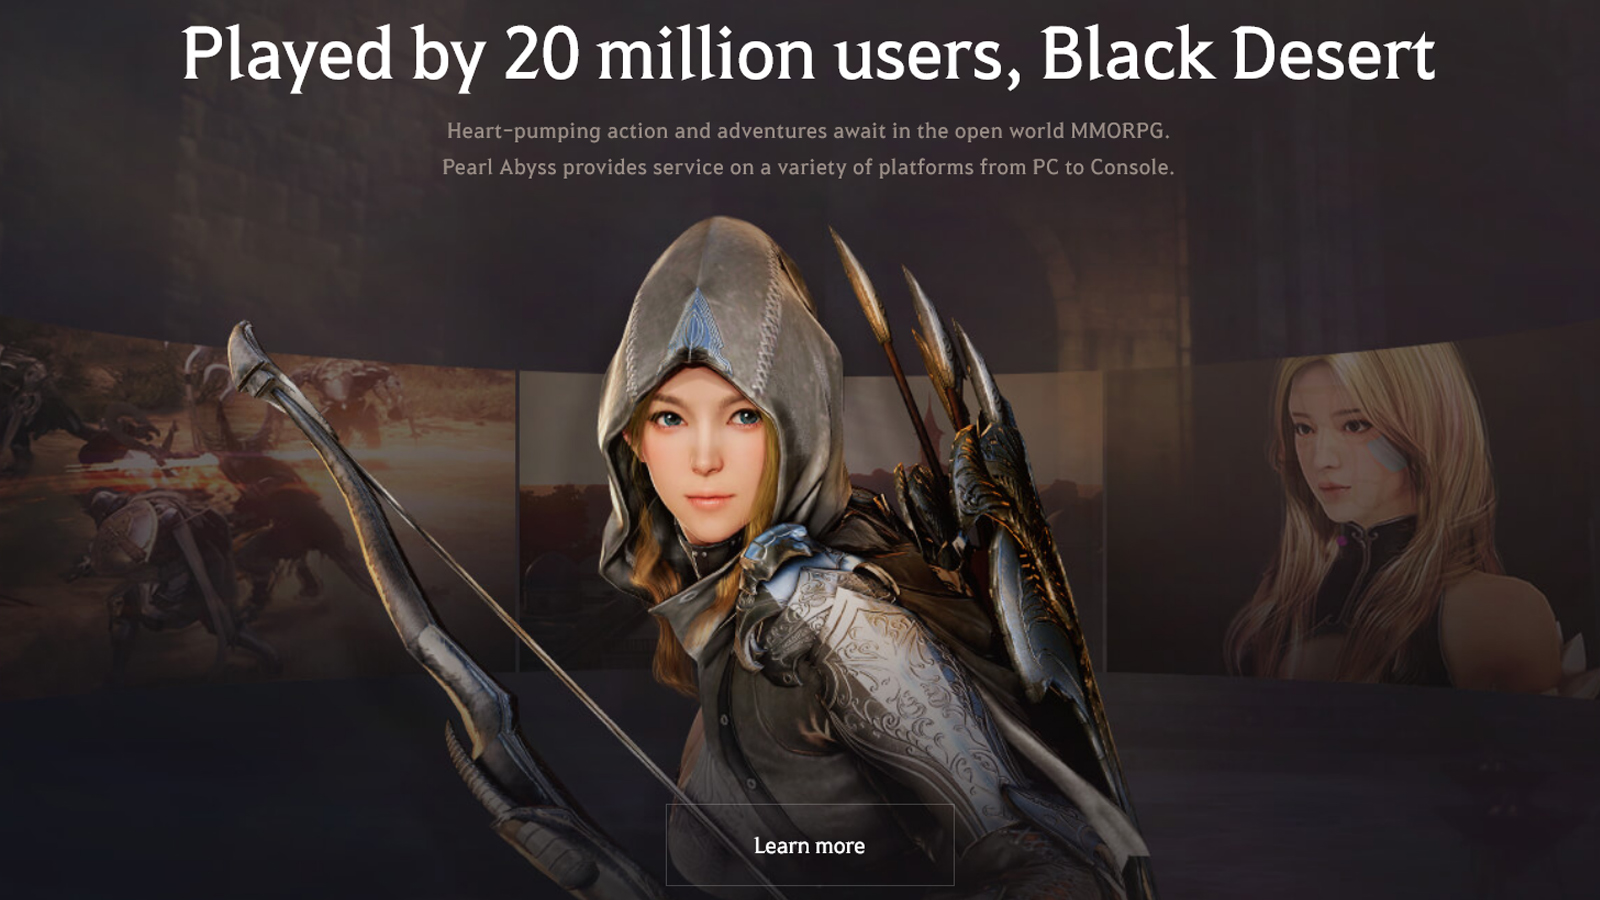 Get feedback from a vast remote working audience about Black Desert Online